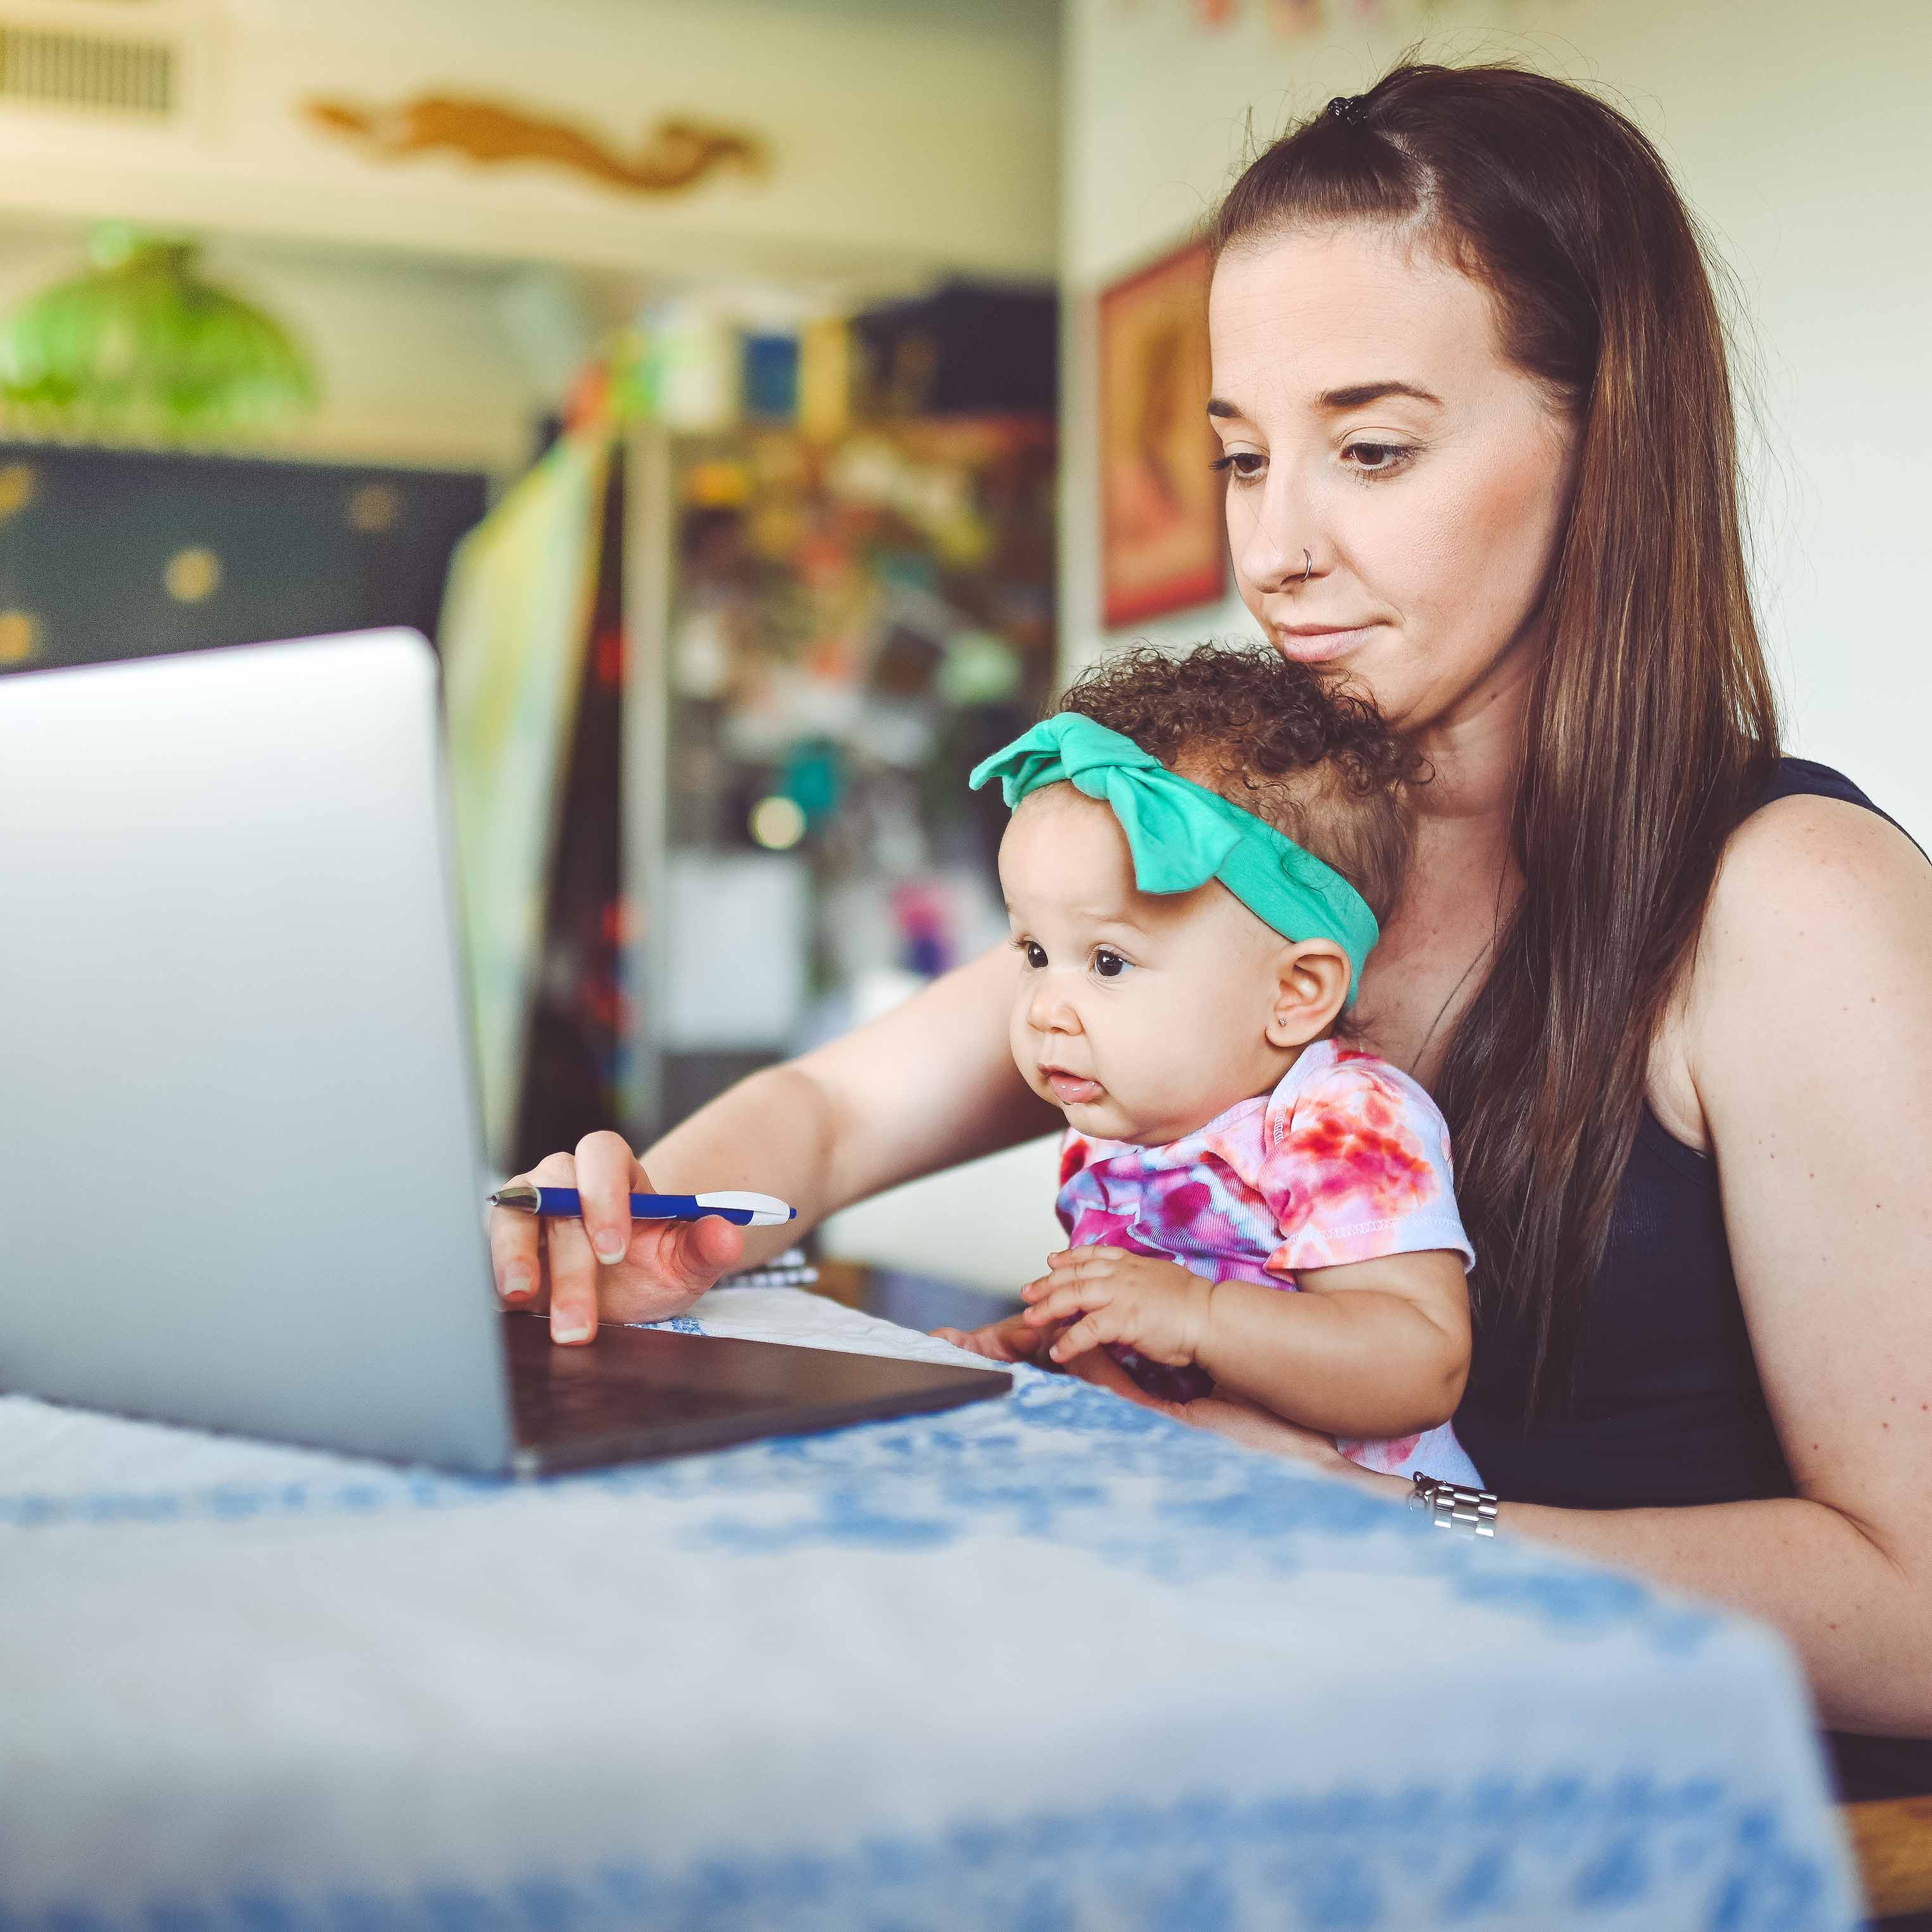 A mom typing on a laptop while holding a small child on her lap